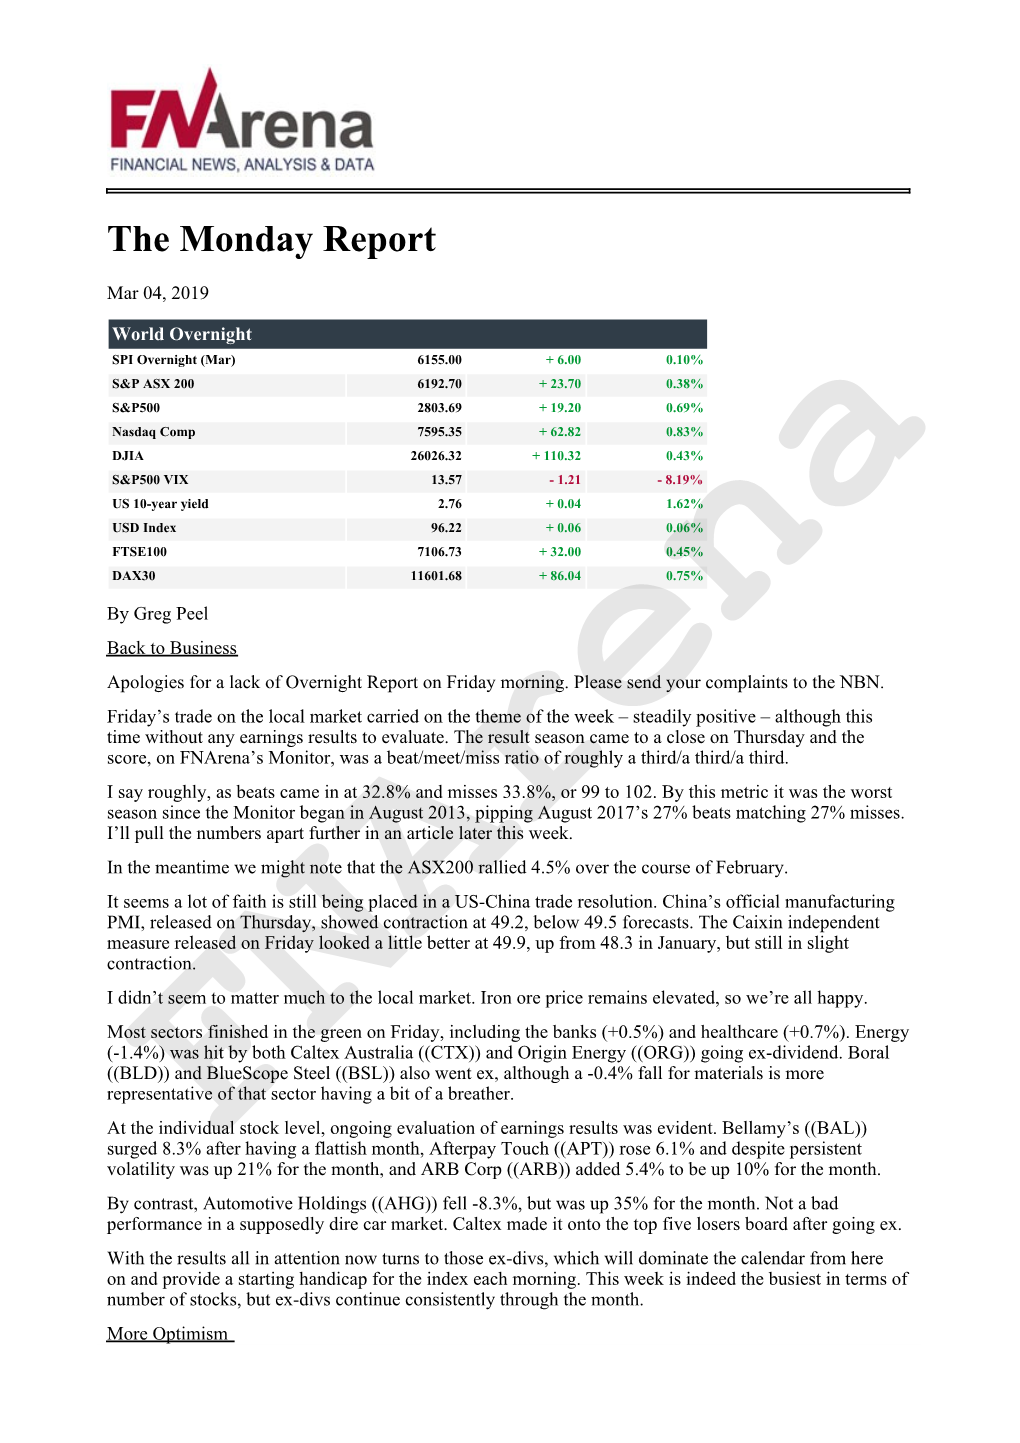 The Monday Report